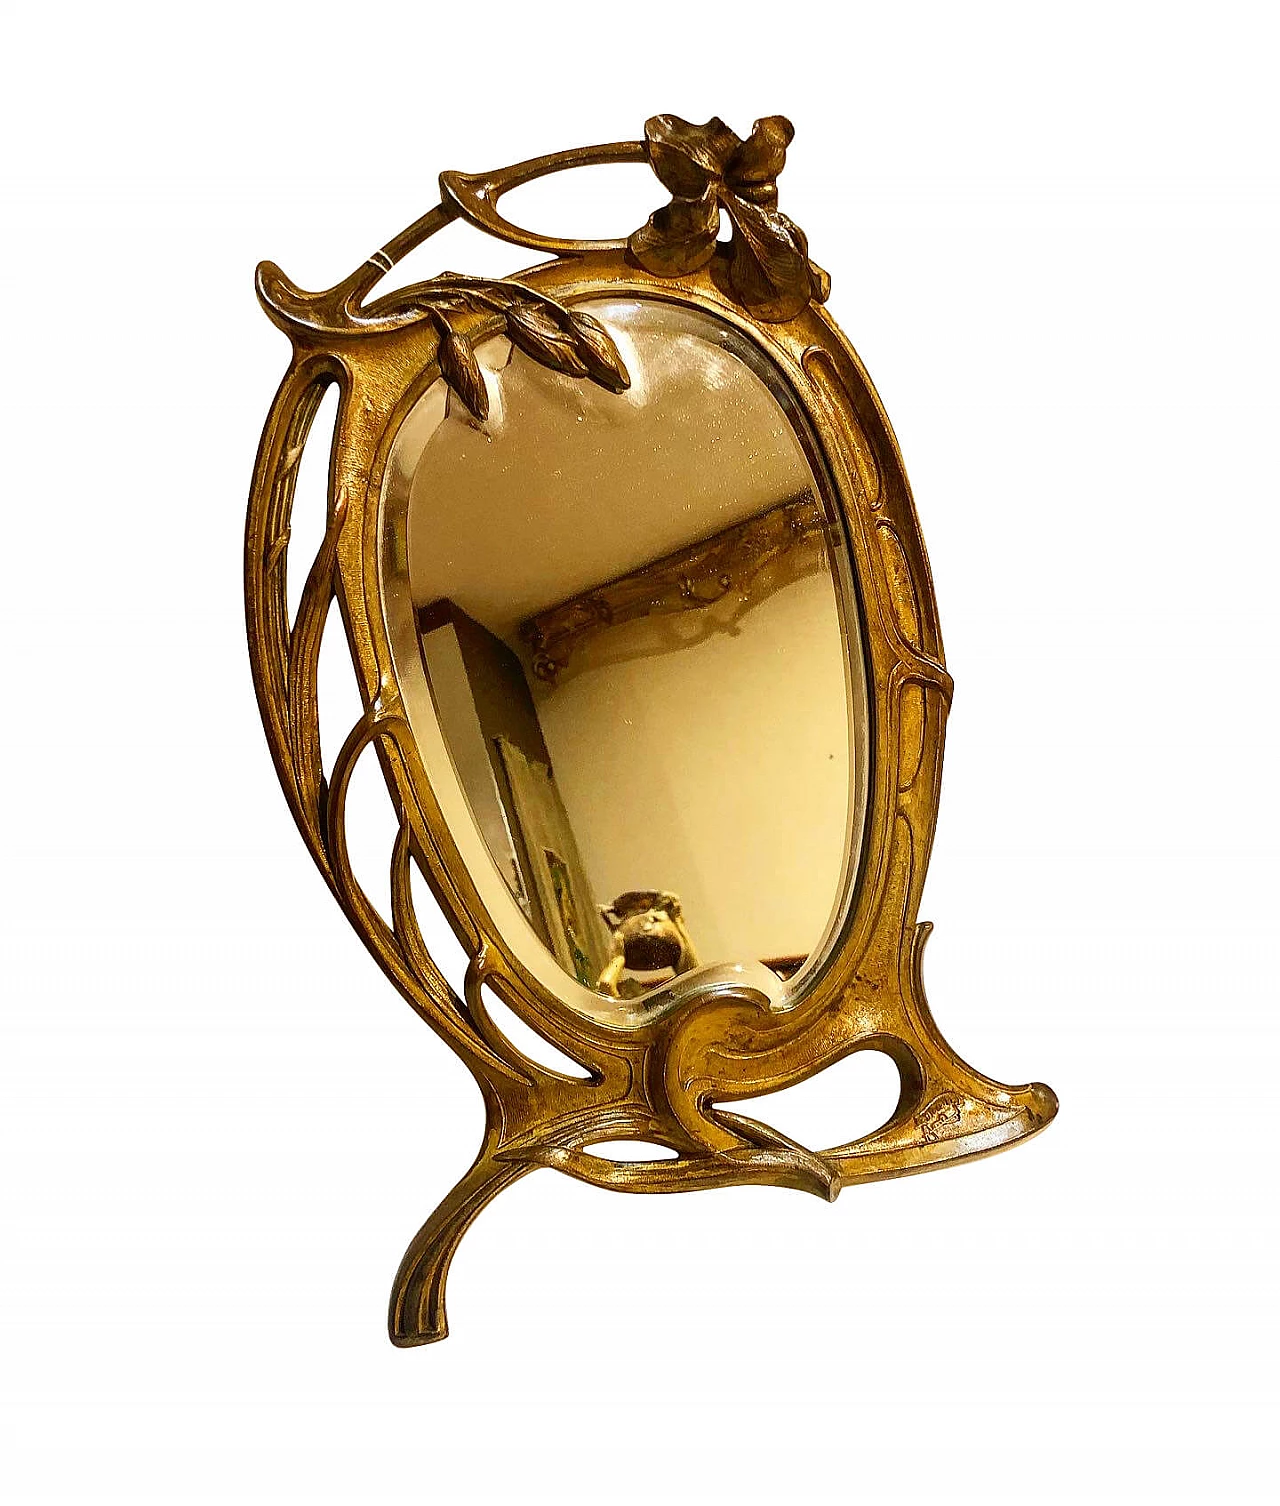 Art Nouveau gilded metal table mirror by Lauseur, early 1900s 1246046